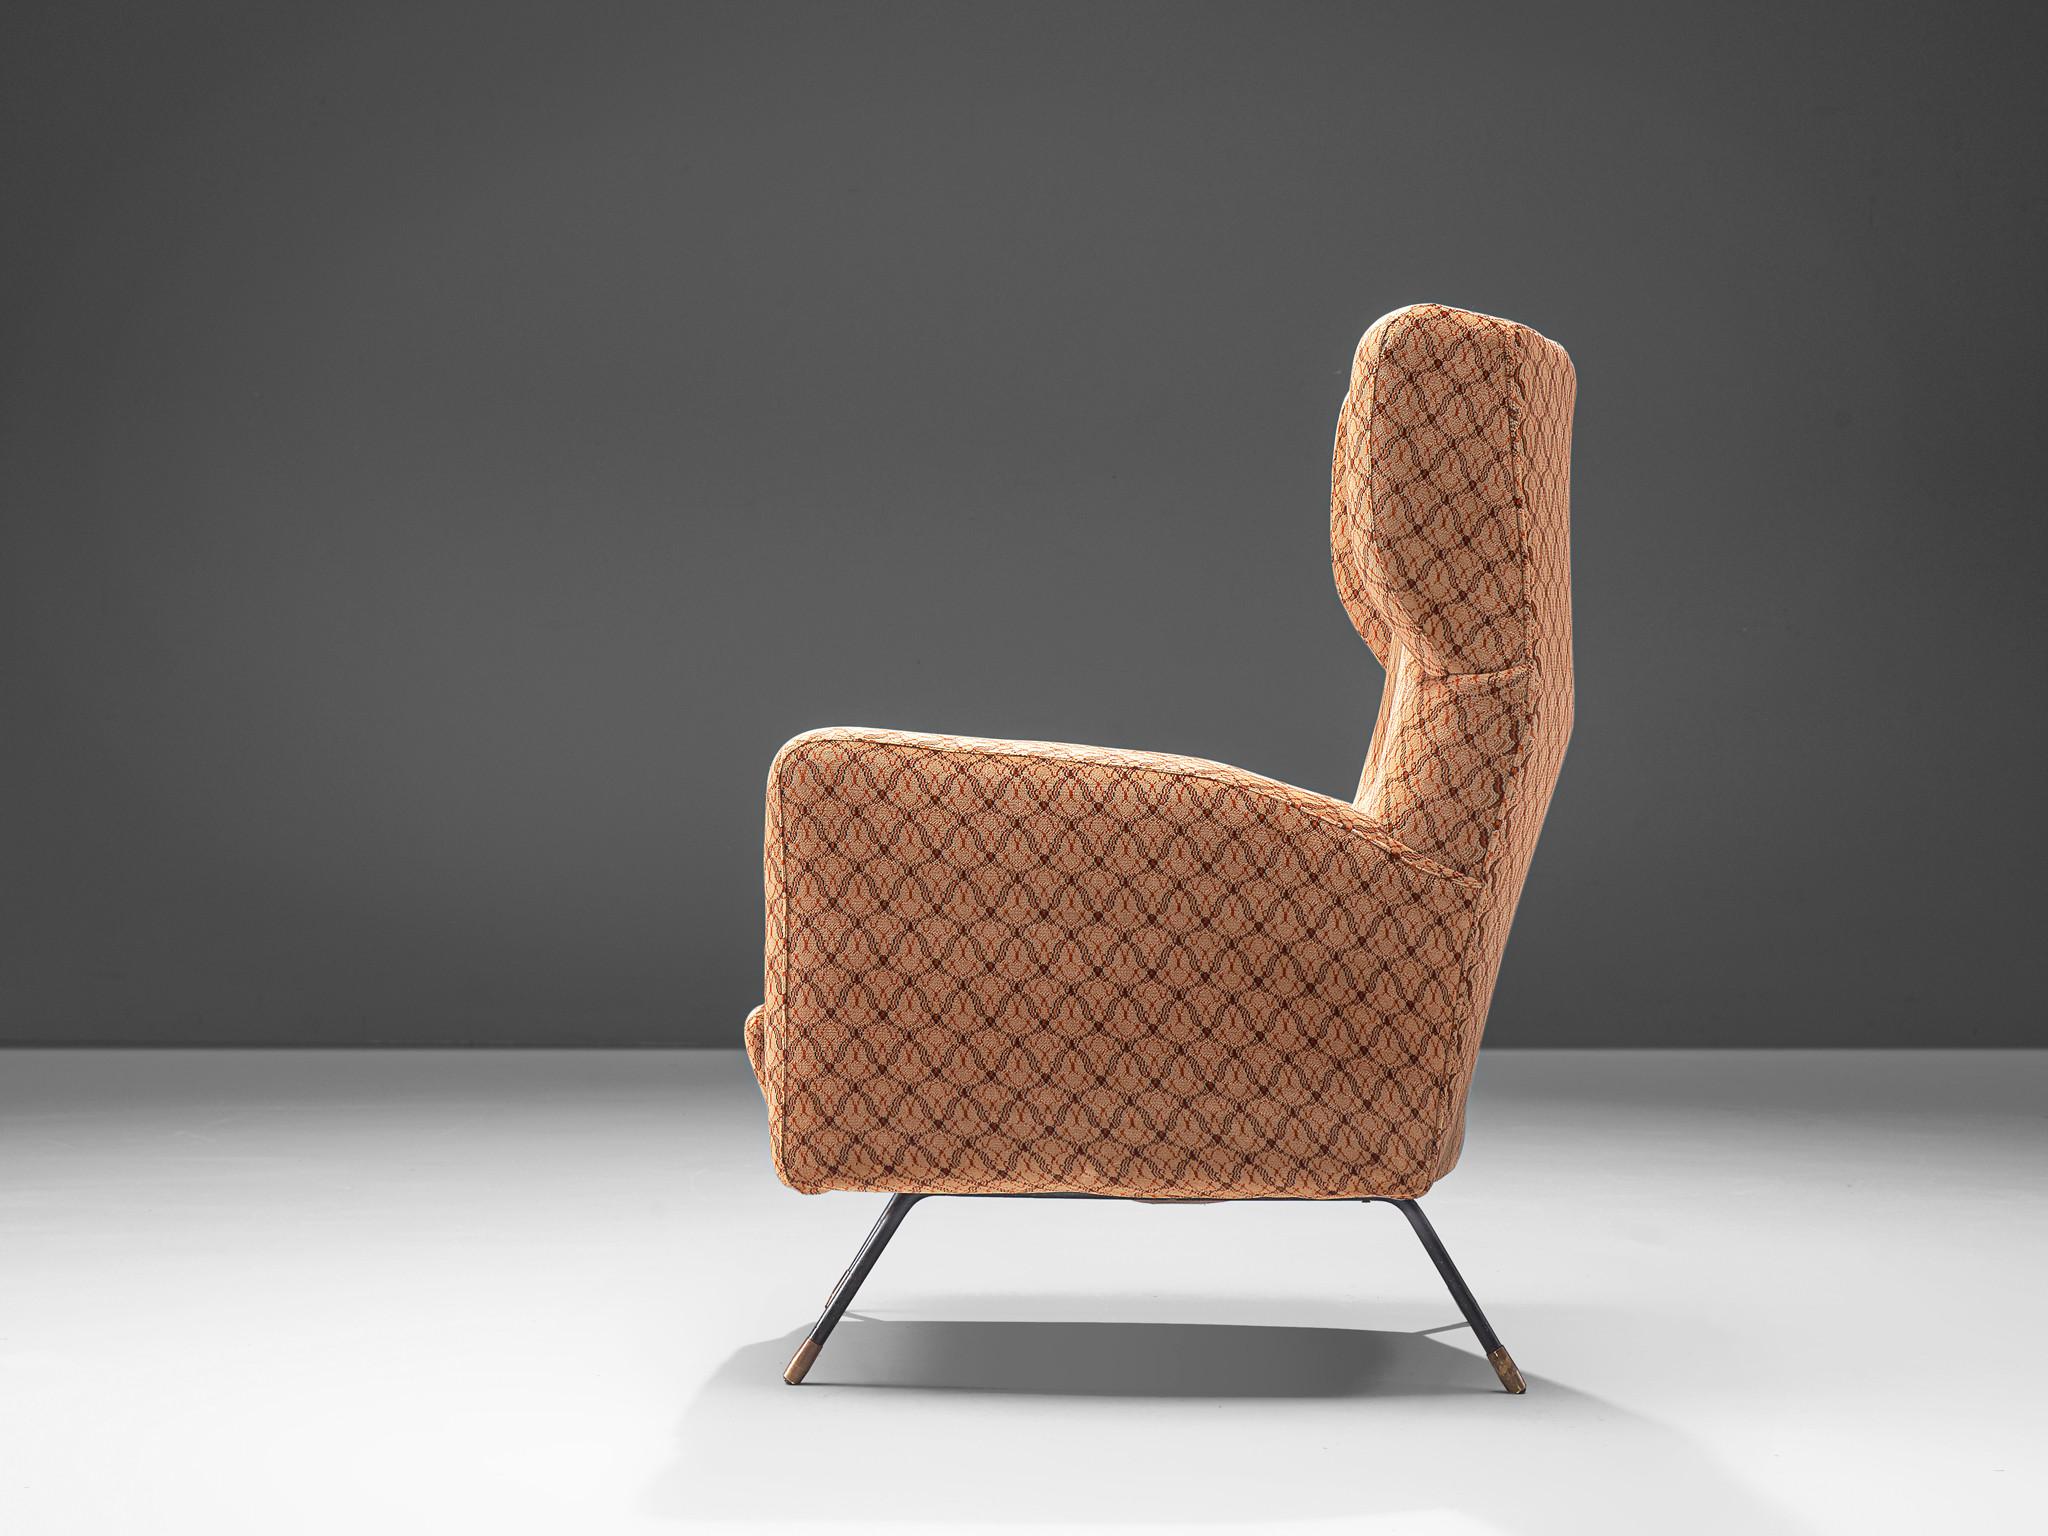 Arflex, lounge chair, metal, brass, fabric, metal, Italy, 1960s

Admirable lounge chair manufactured by Arflex. Characteristic for the chair are the outwards pointing armrests and the dynamic lines of the seat. Thanks to the shape and overall curves